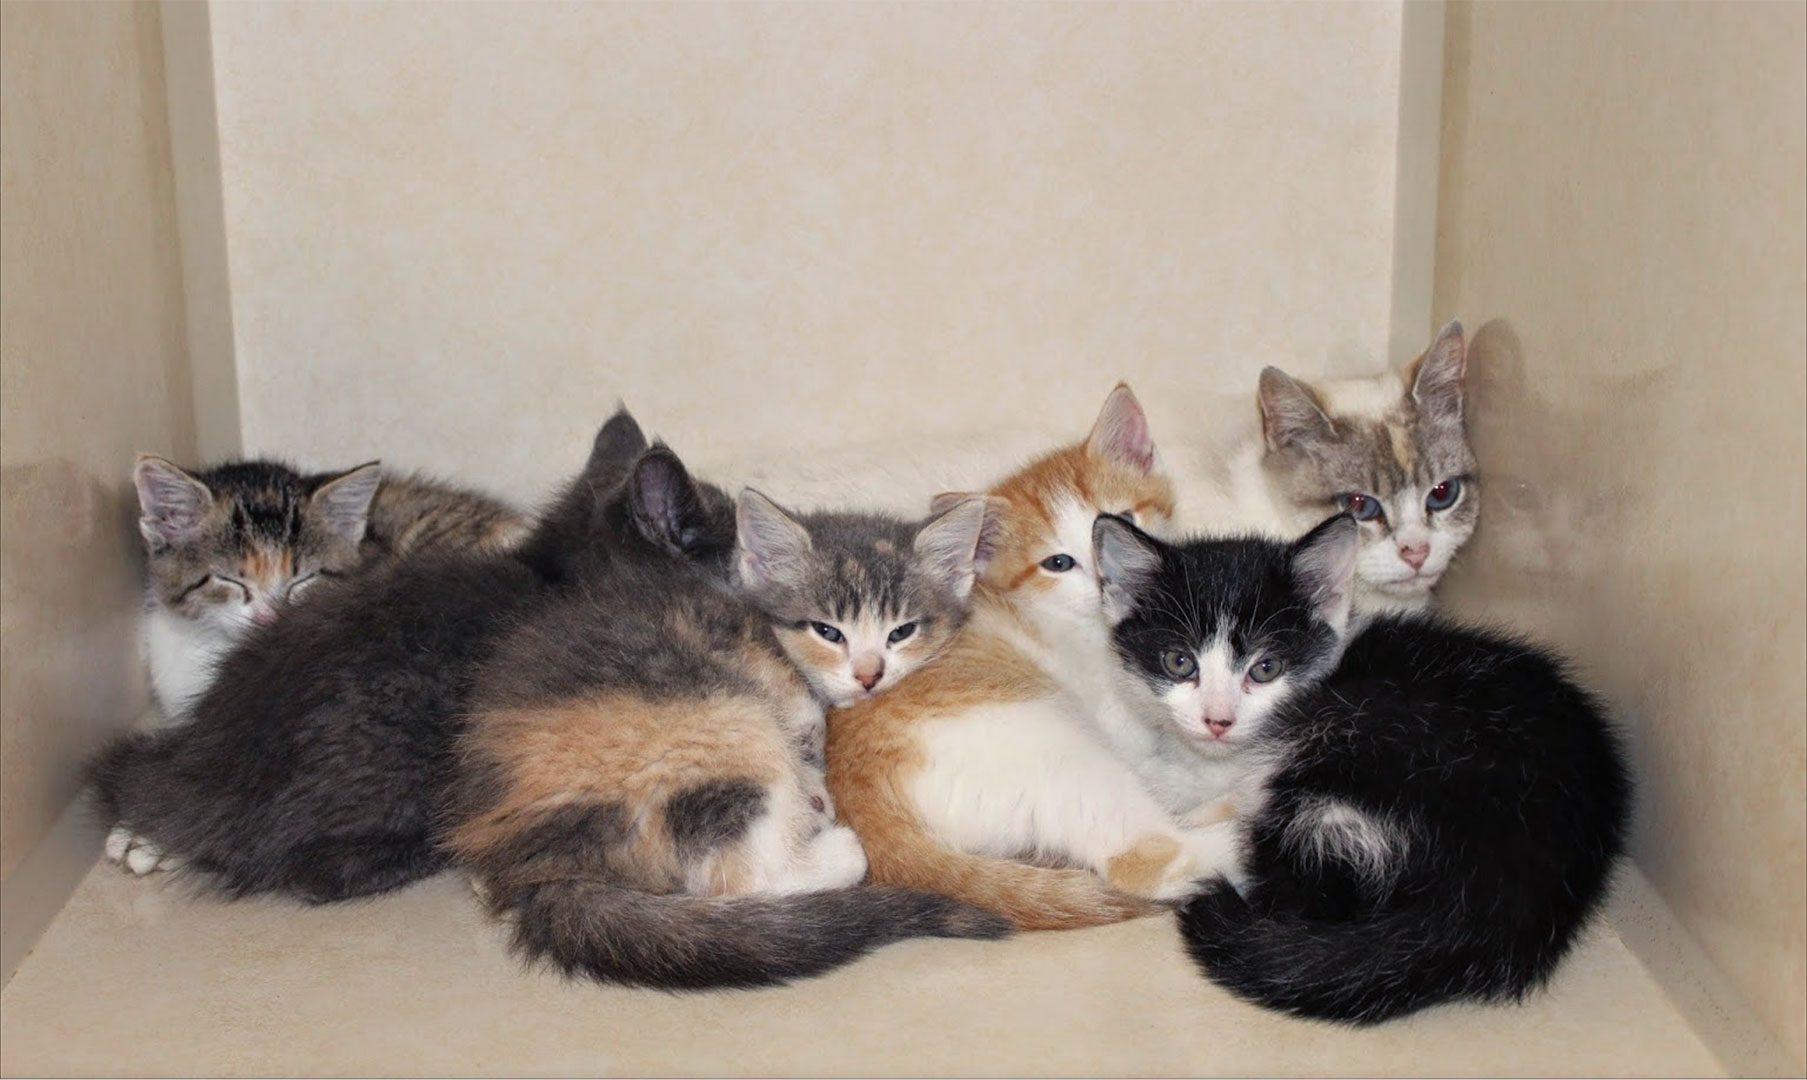 Kittens - Veterinarian in Florence, KY - Middendorf Animal Hospital and Laser Centre, Florence, KY